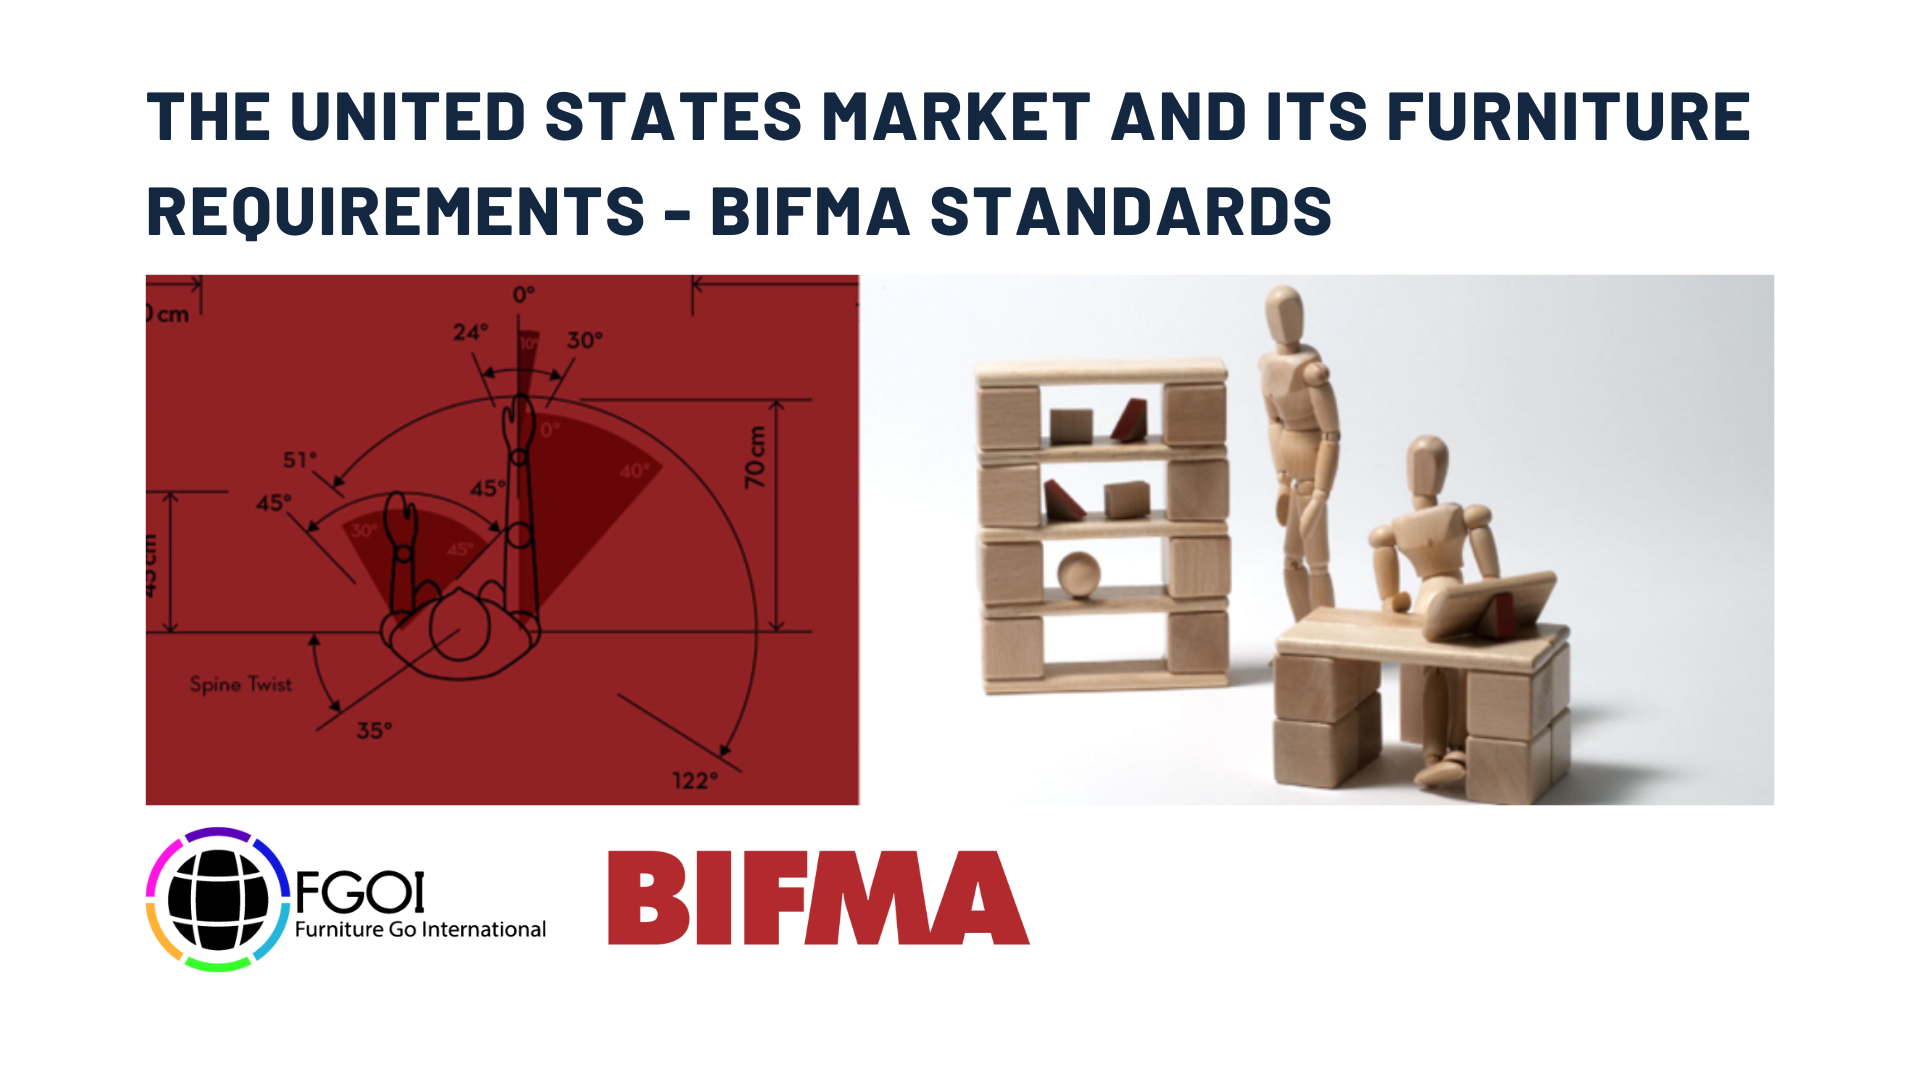 The United States market and its furniture requirements